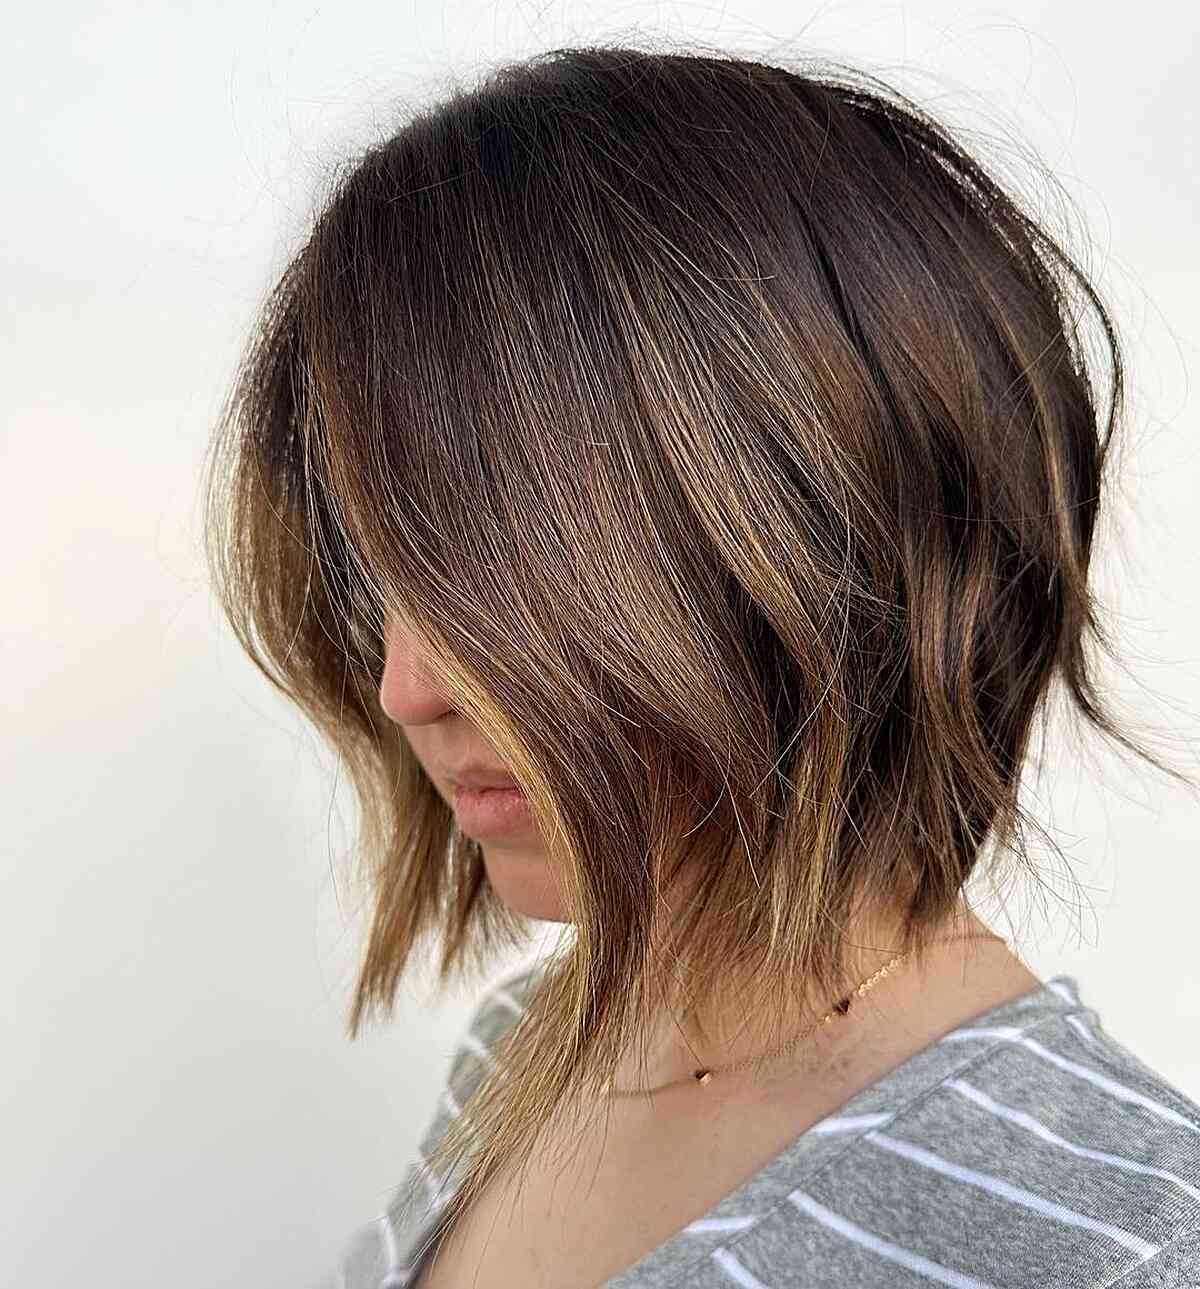 Layered Bob with Internal Texture for Fine Hair and for ladies with a short, above-the-shoulder cut